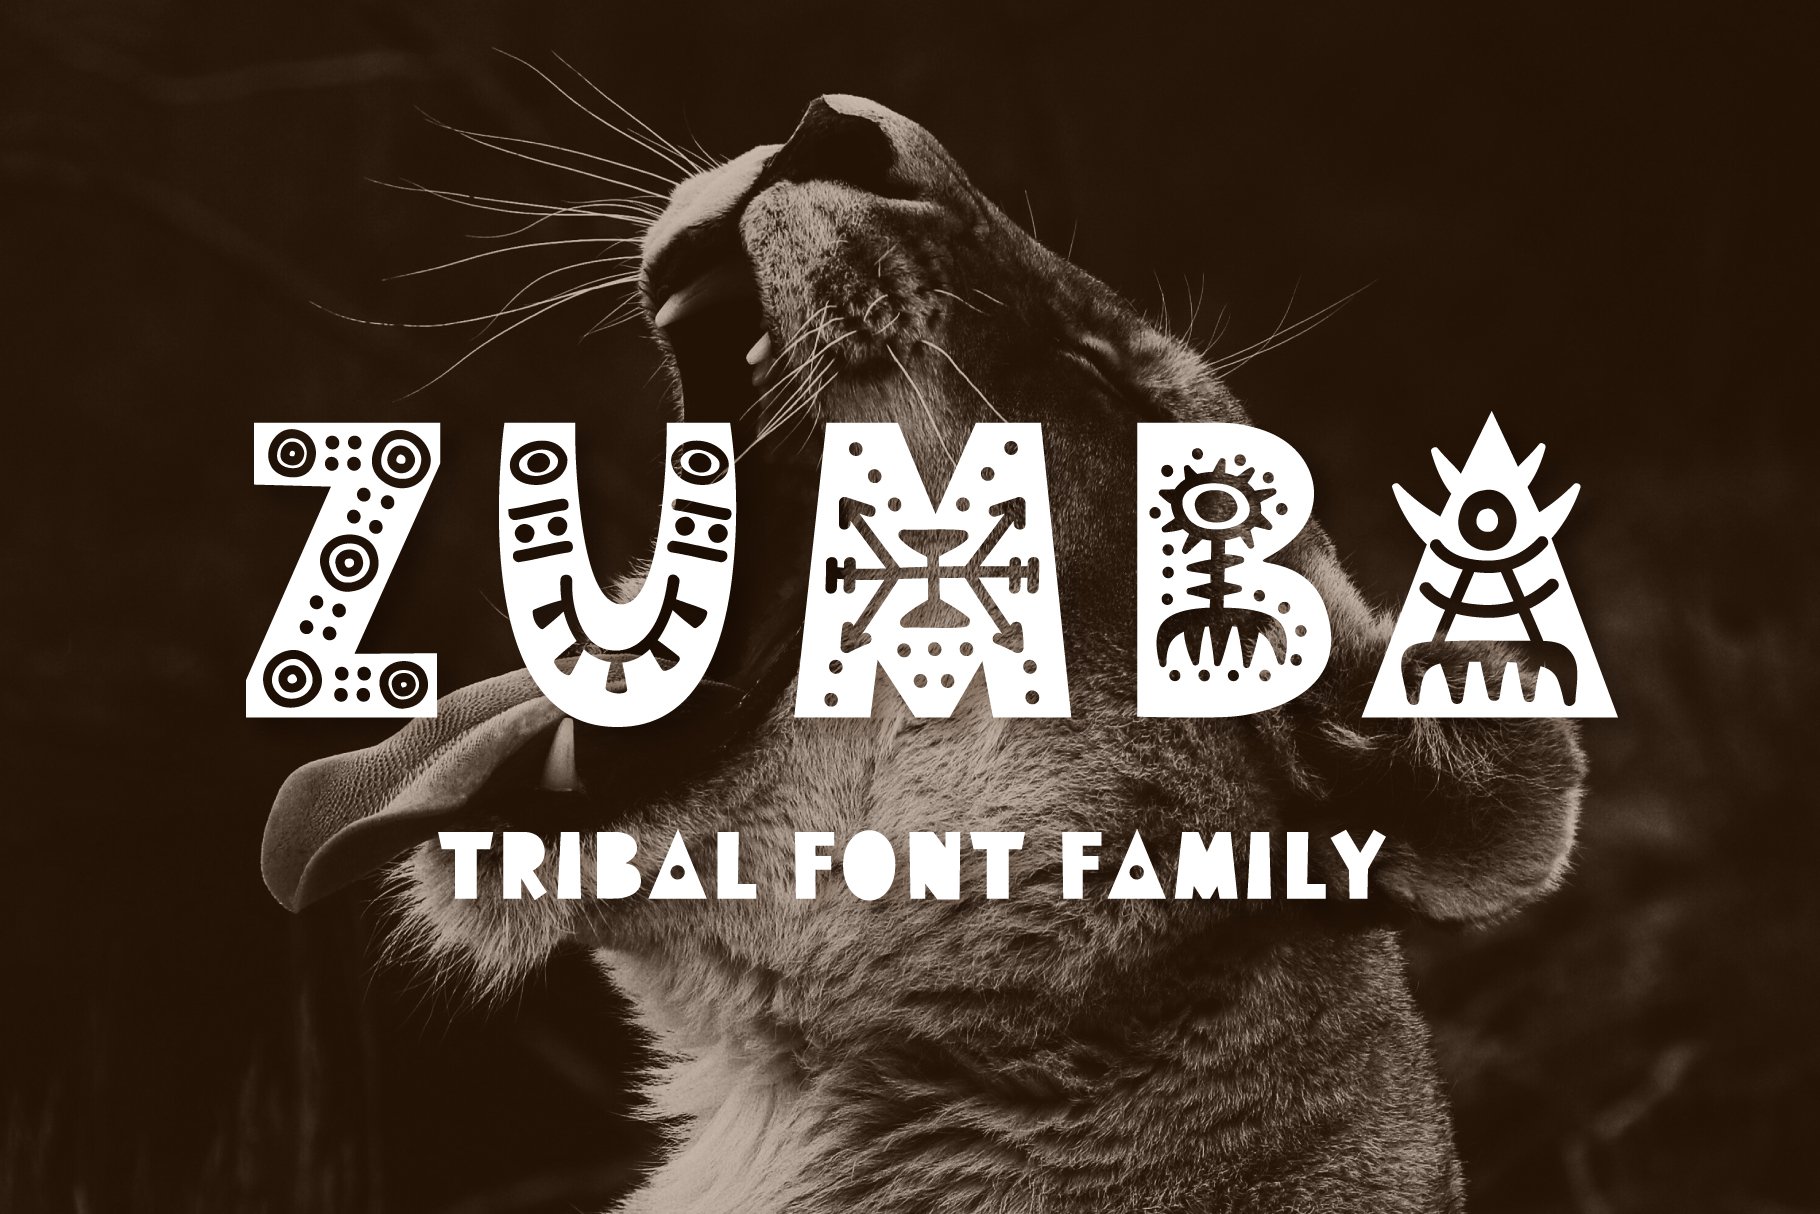 Zumba Tribal Font Family cover image.